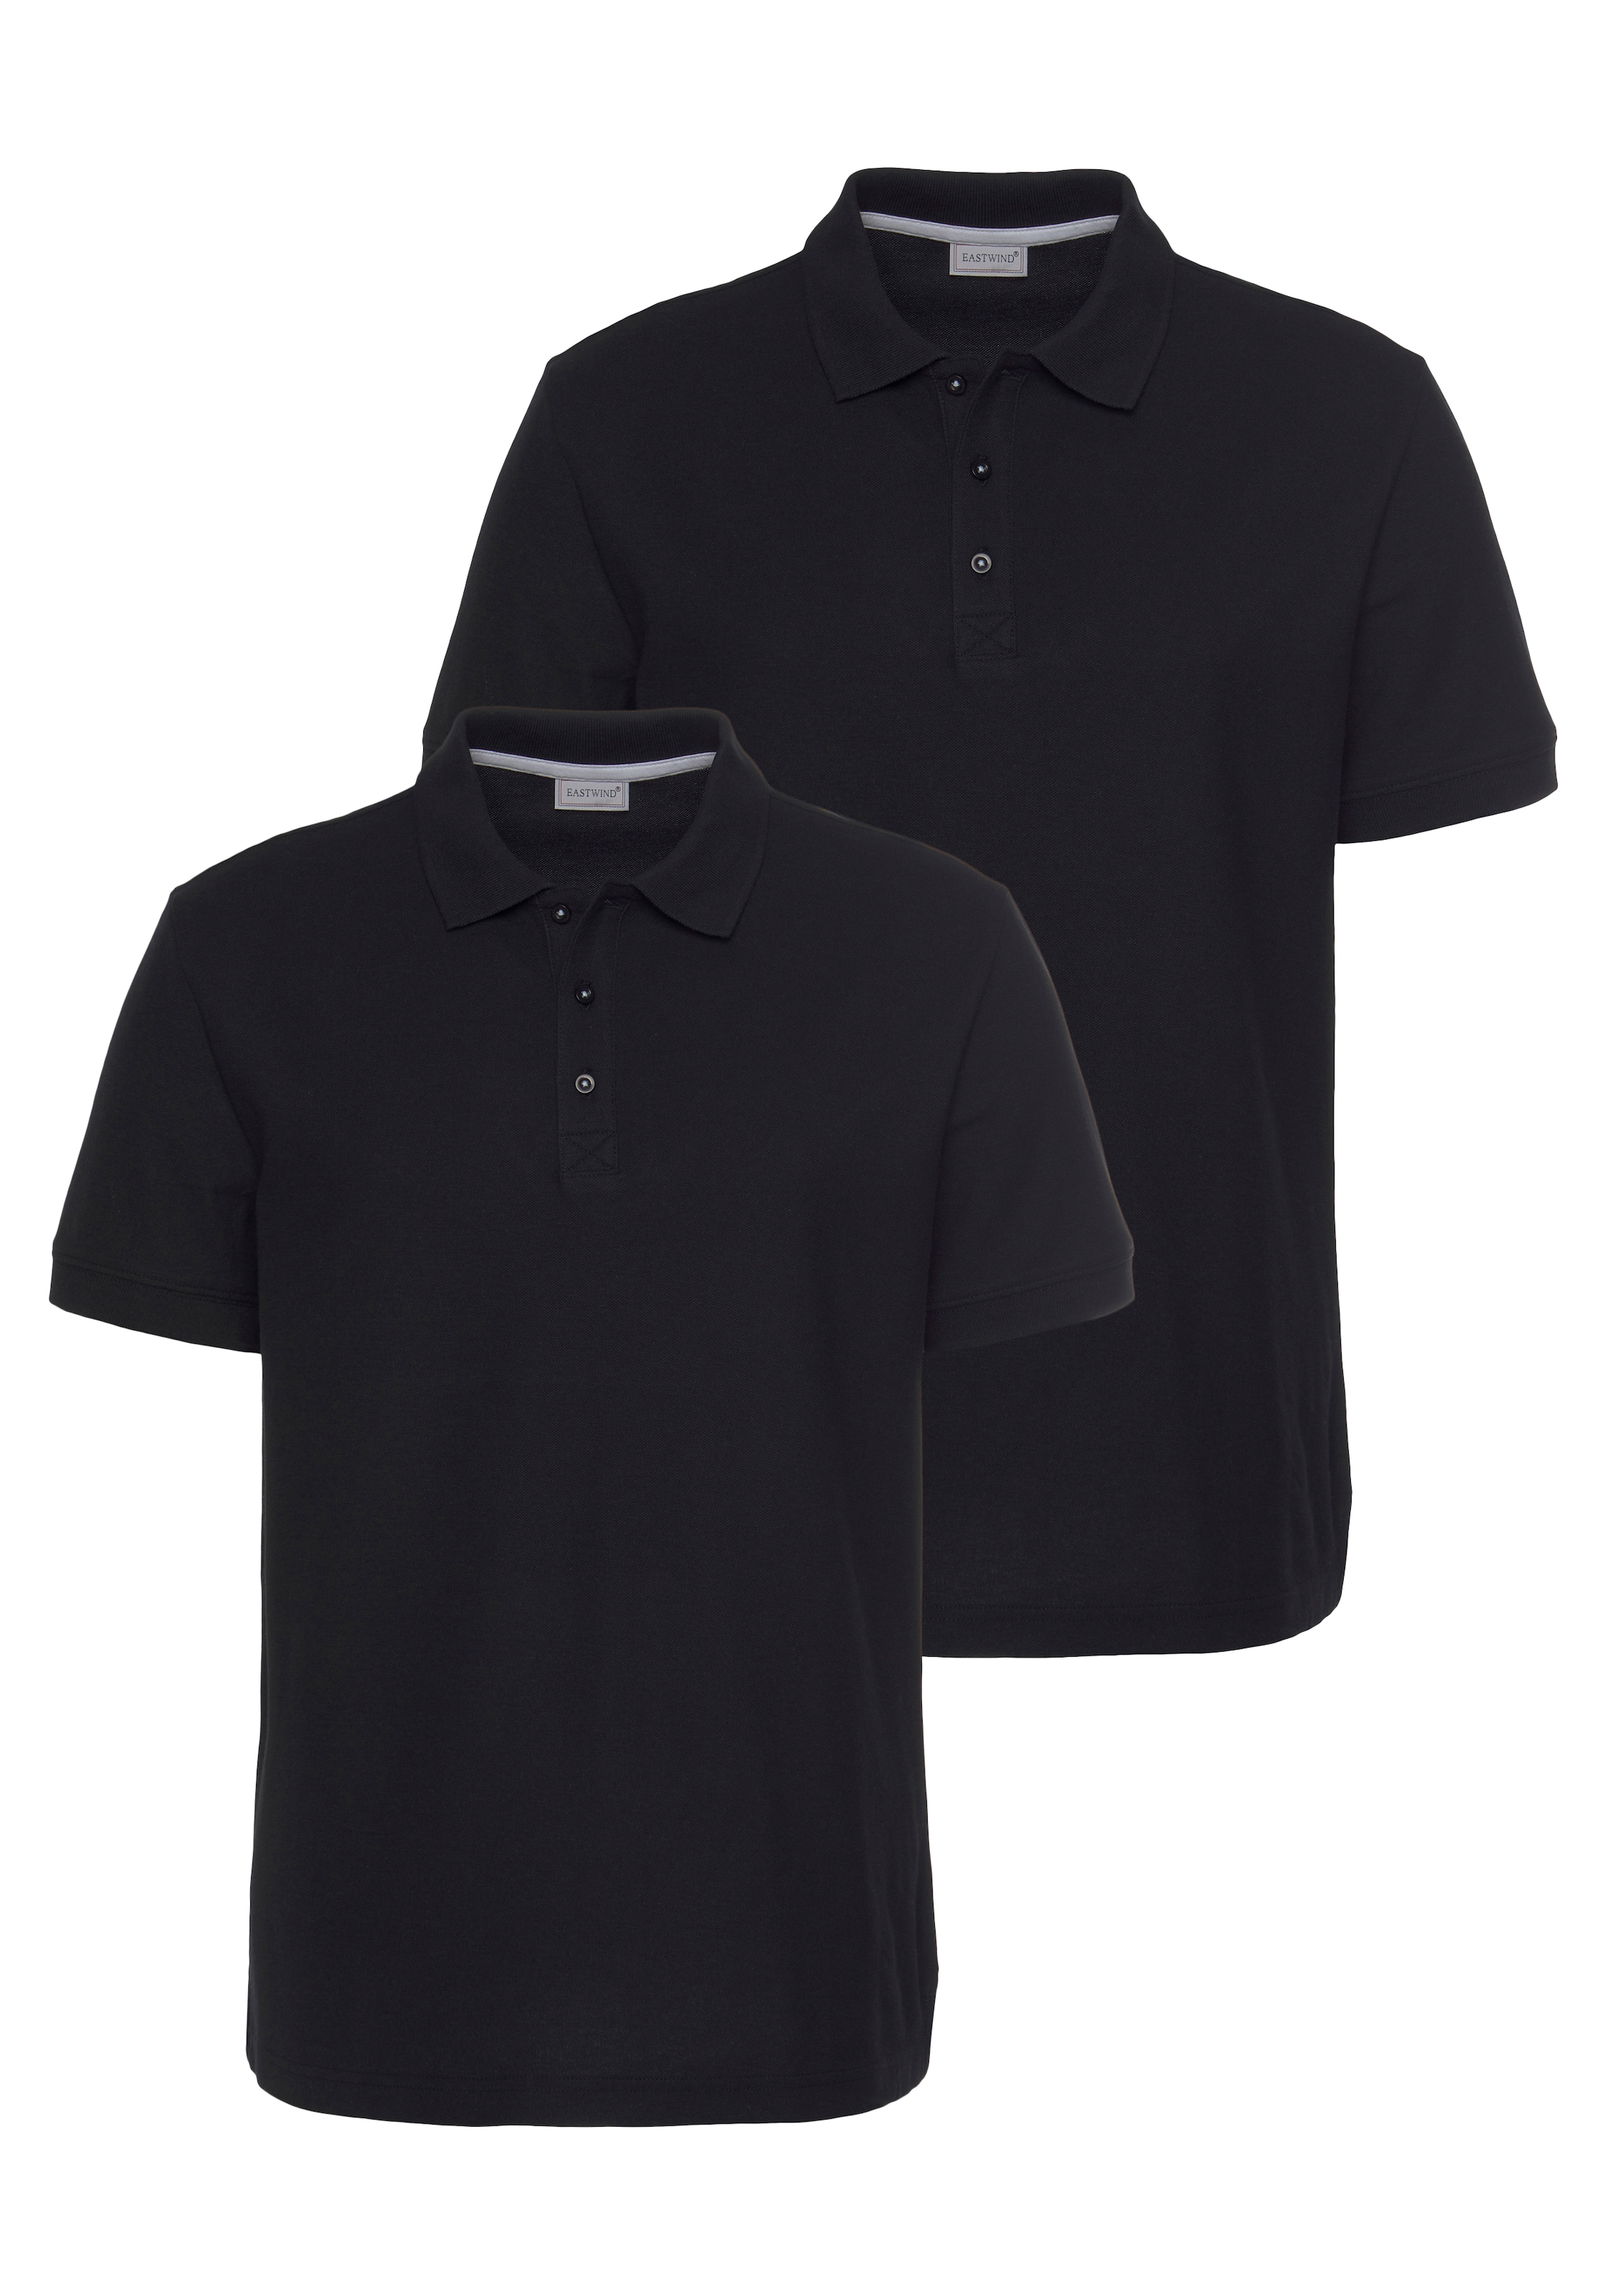 Polo, Poloshirt bei navy+white«, Eastwind (2er-Pack) »Double Pack